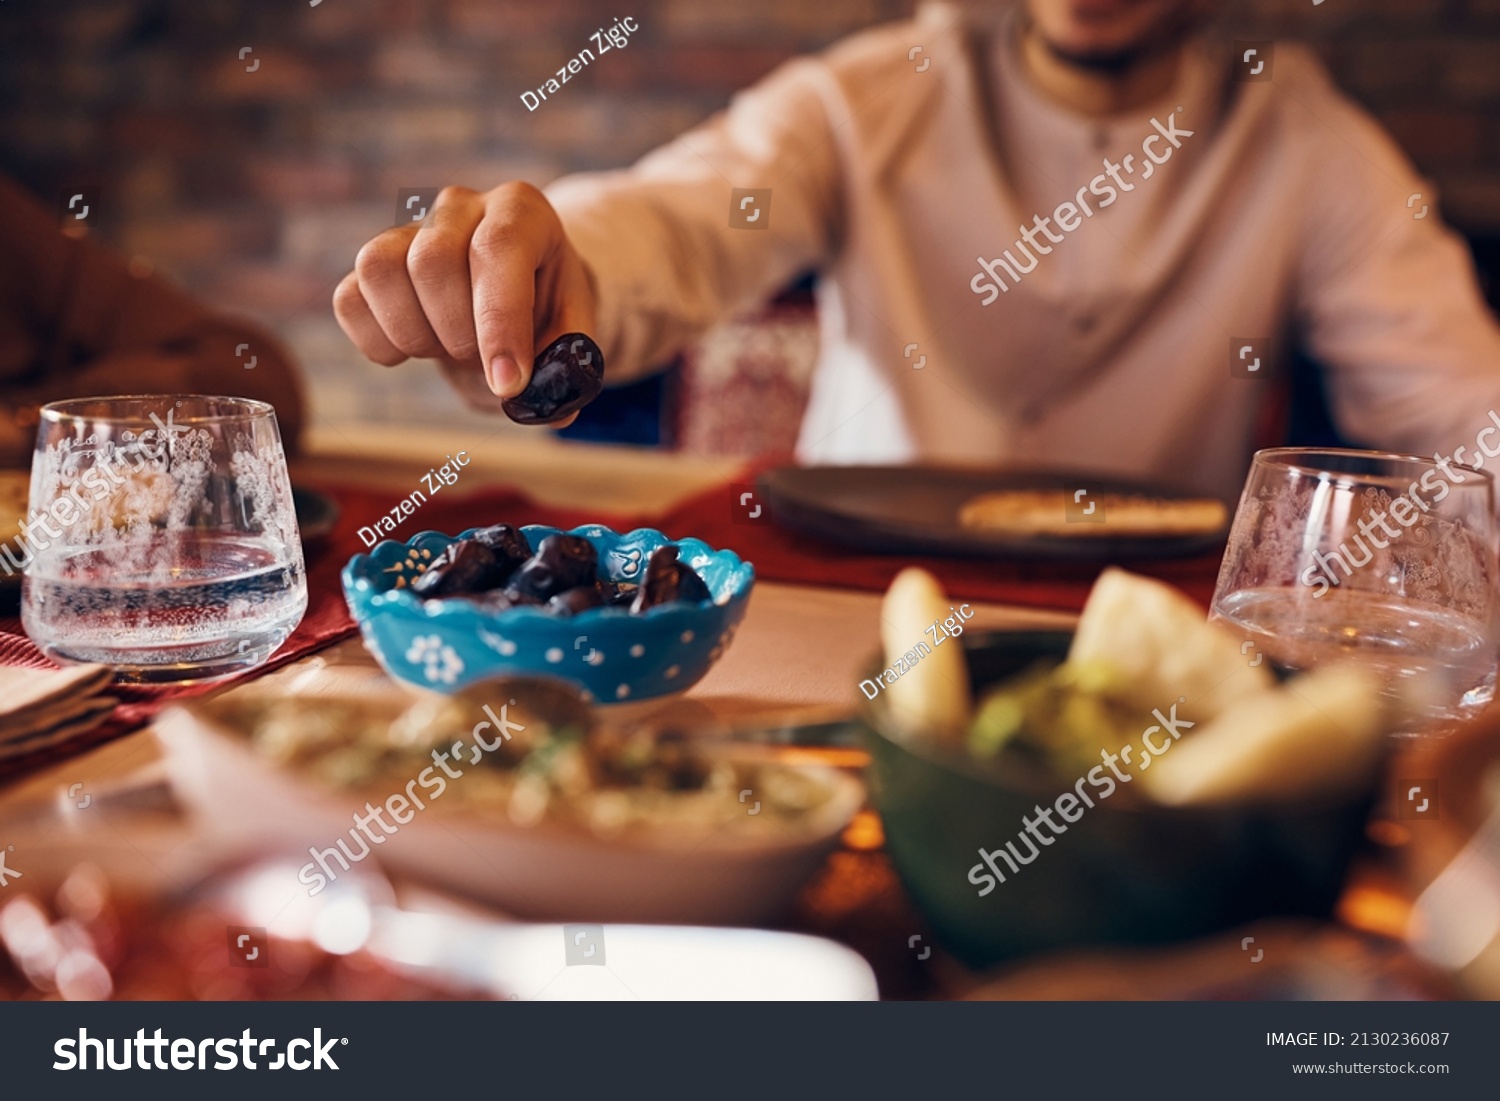 Close-up of Middle Eastern man eating date during Ramadan meal at home.  #2130236087